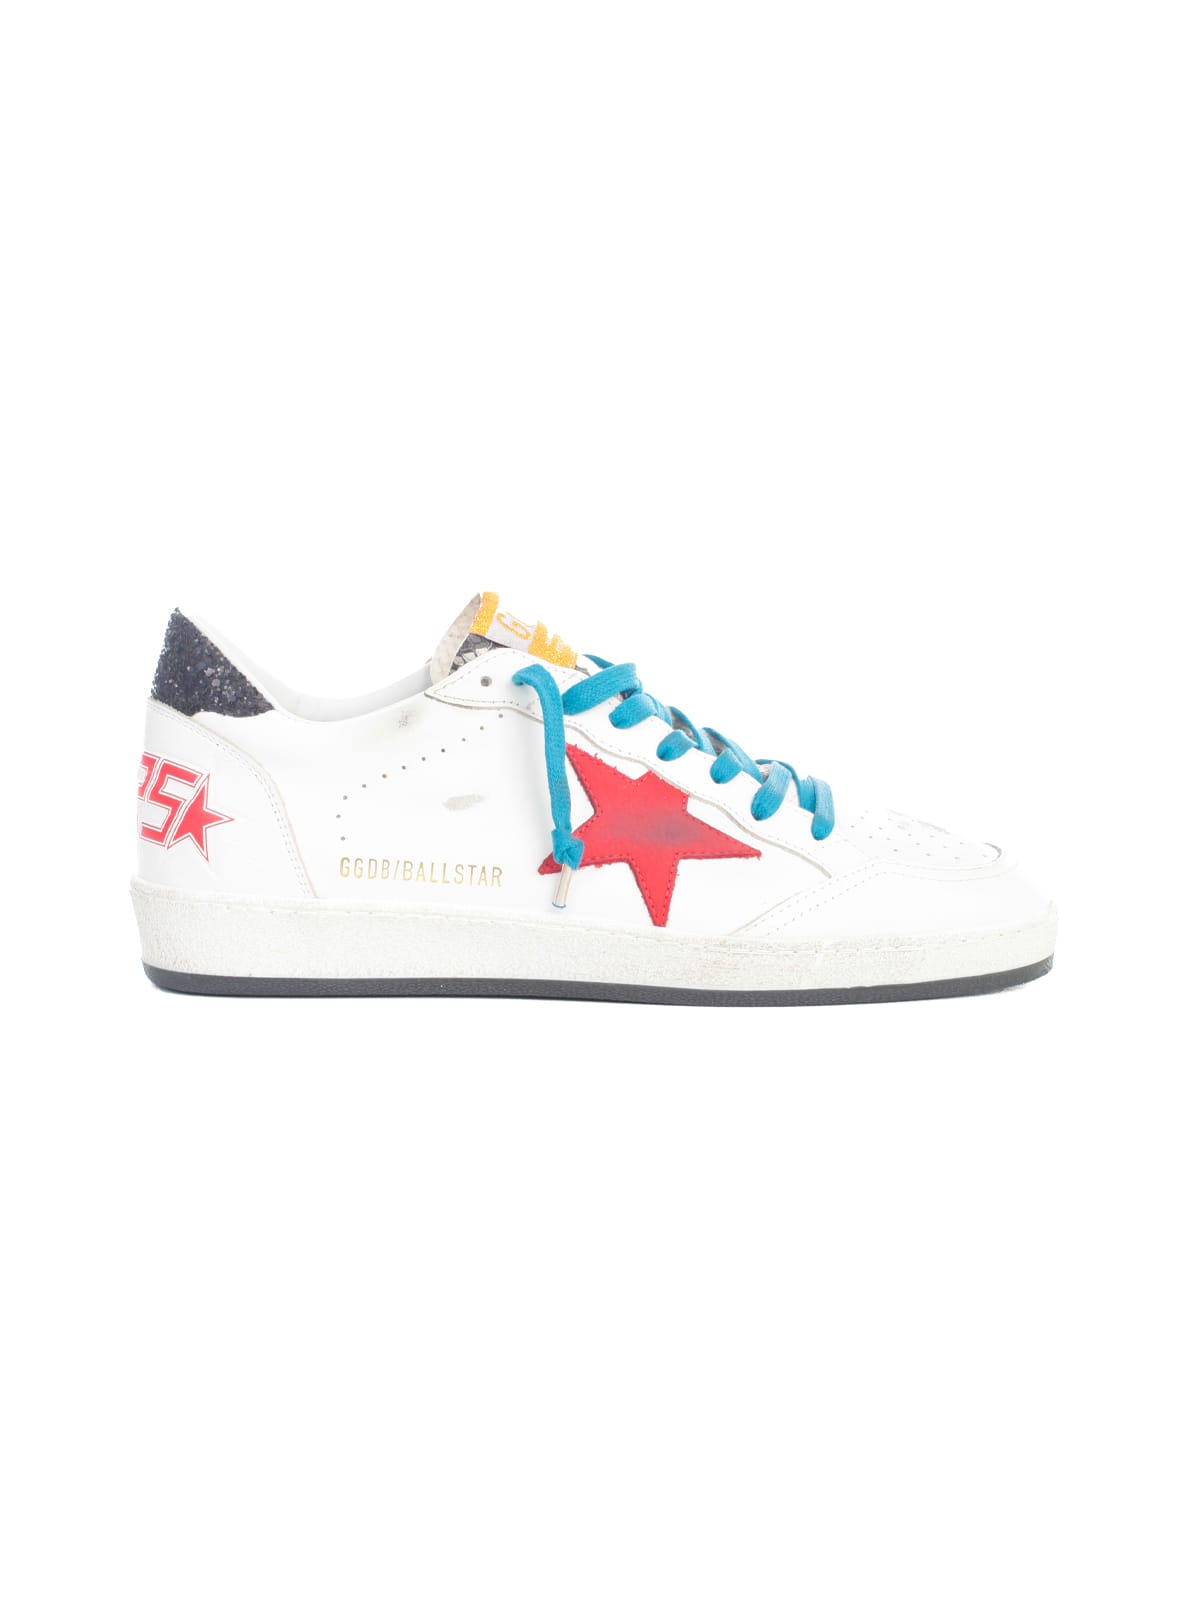 Golden Goose Ballstar Leather Upper And Spur Phyton Tongue